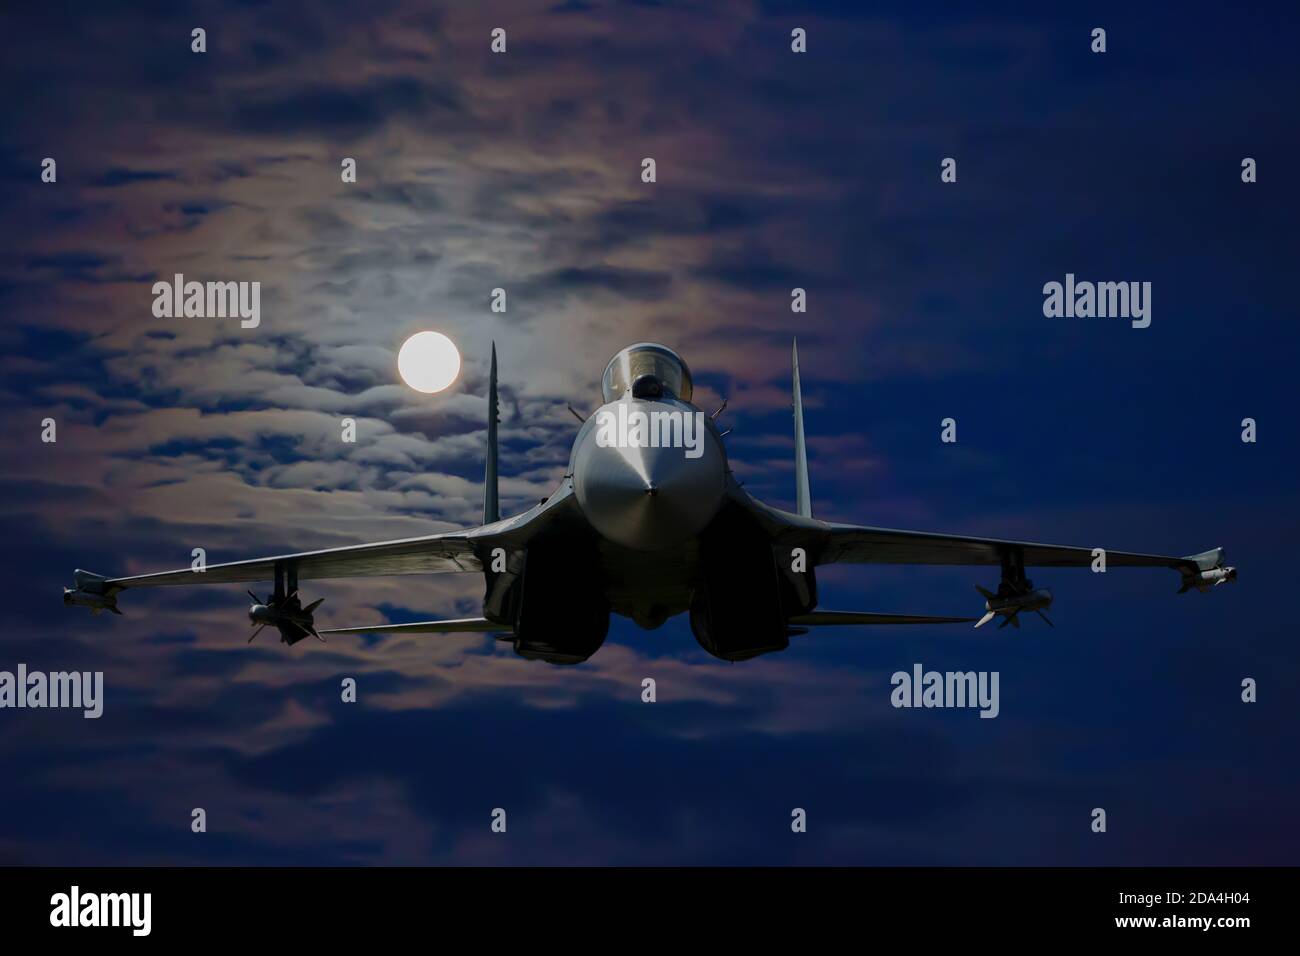 Russian military aircraft in the sky on a moonlit night Stock Photo